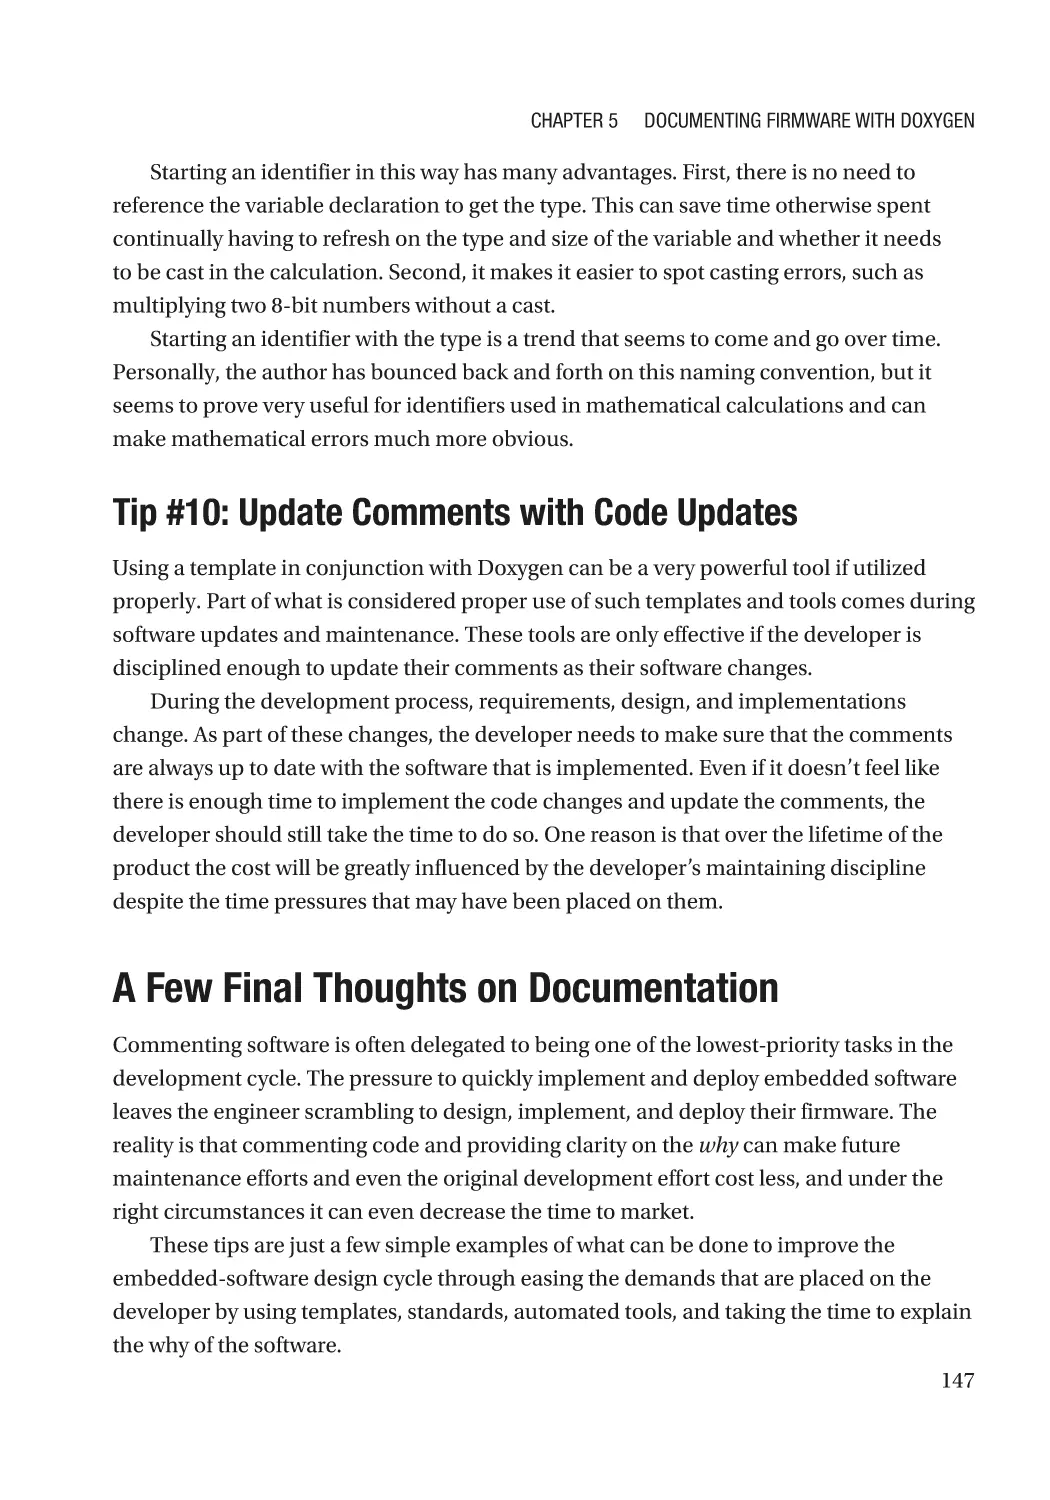 Tip #10
A Few Final Thoughts on Documentation